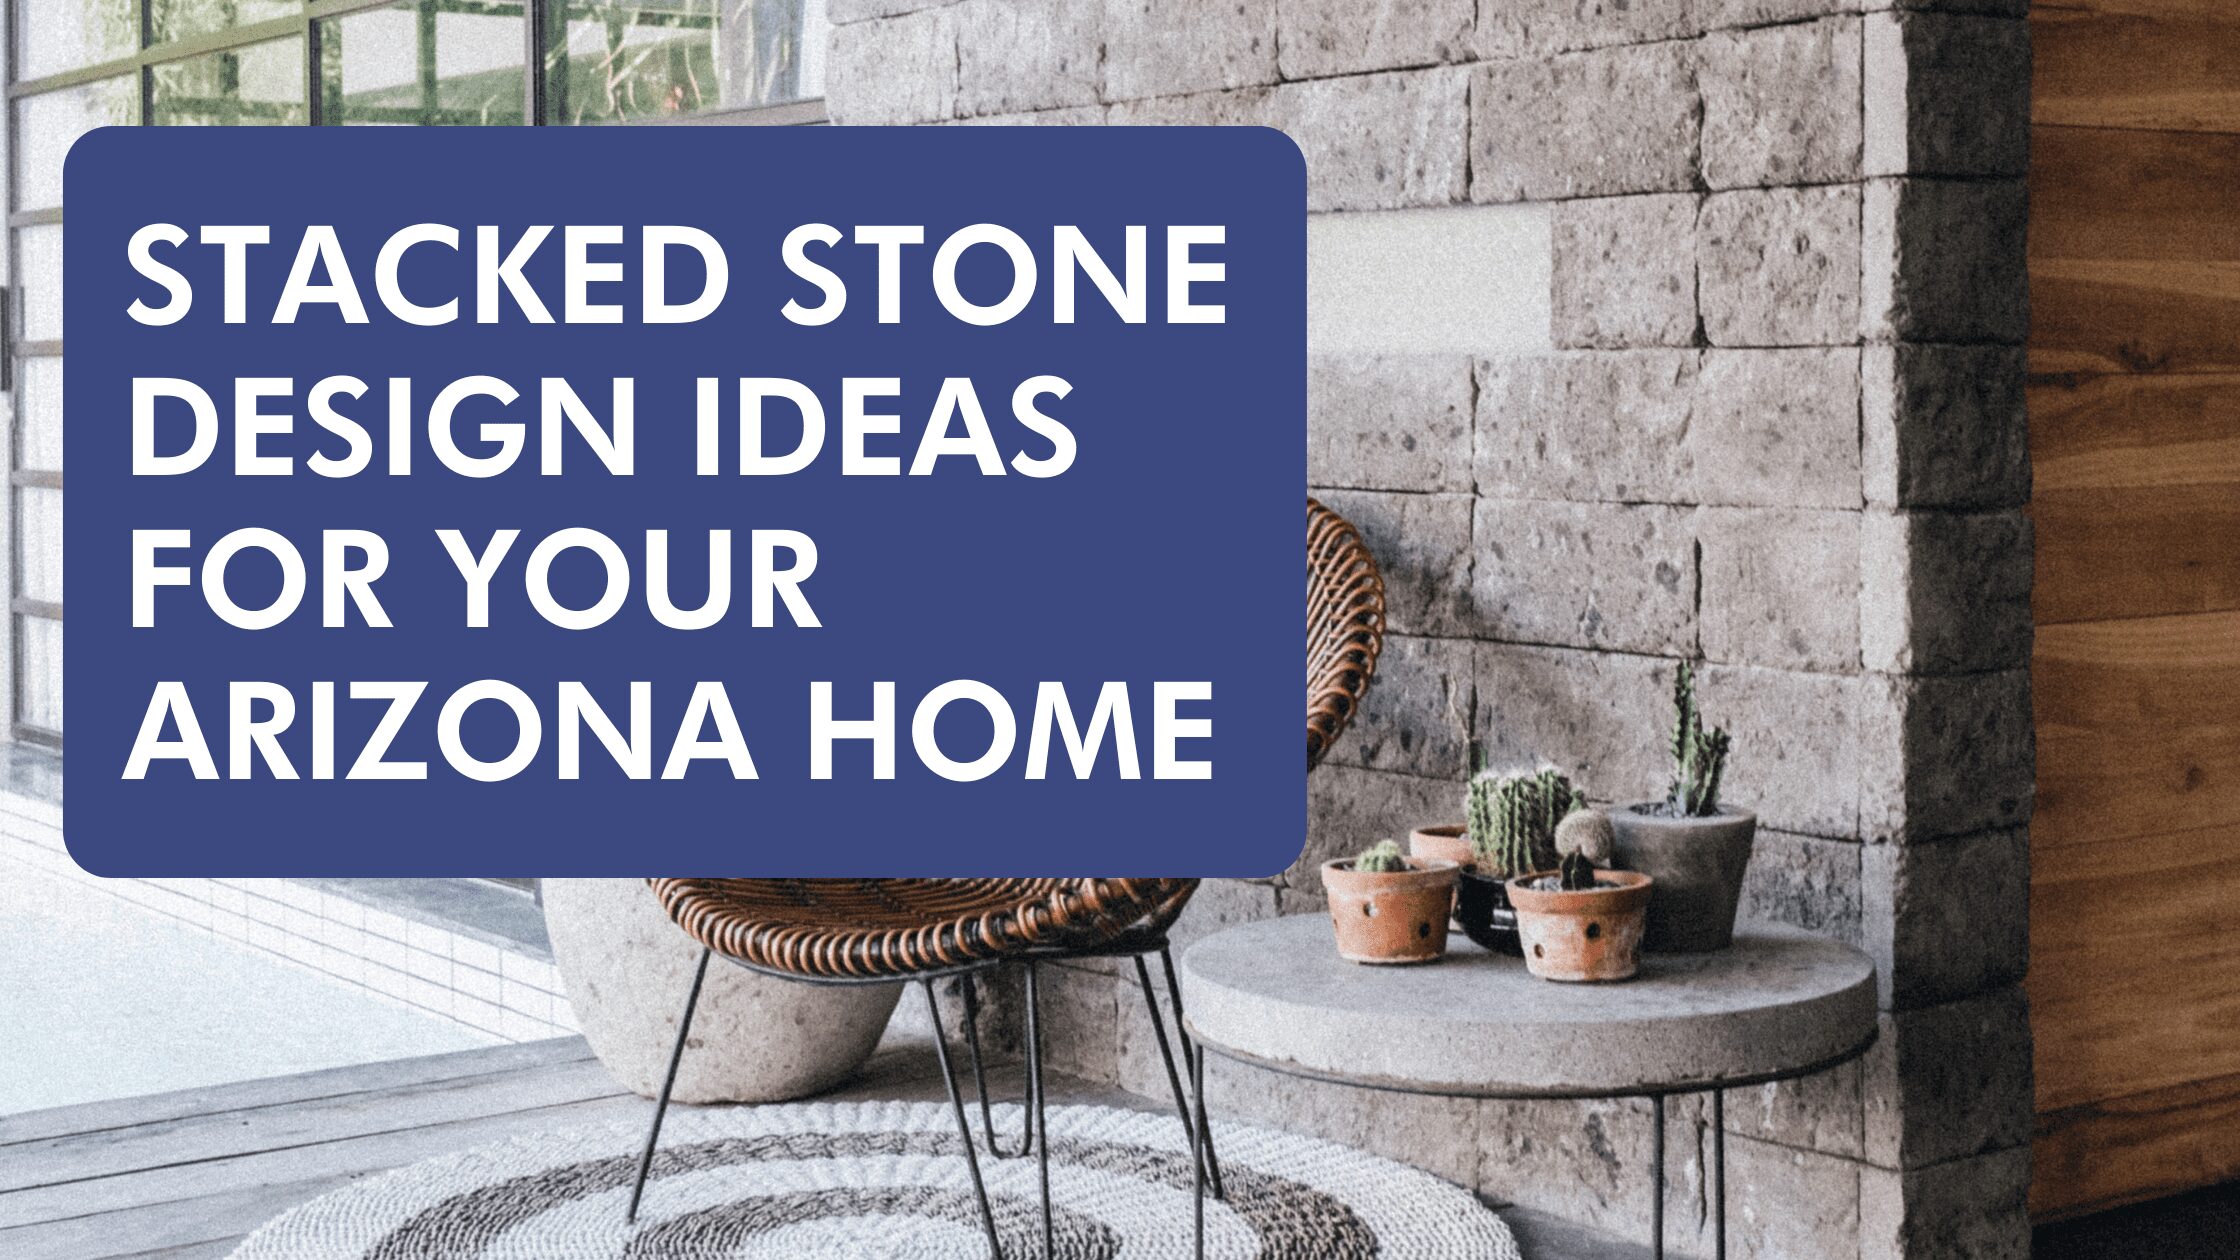 Stacked Stone Design Ideas for Your Arizona Home